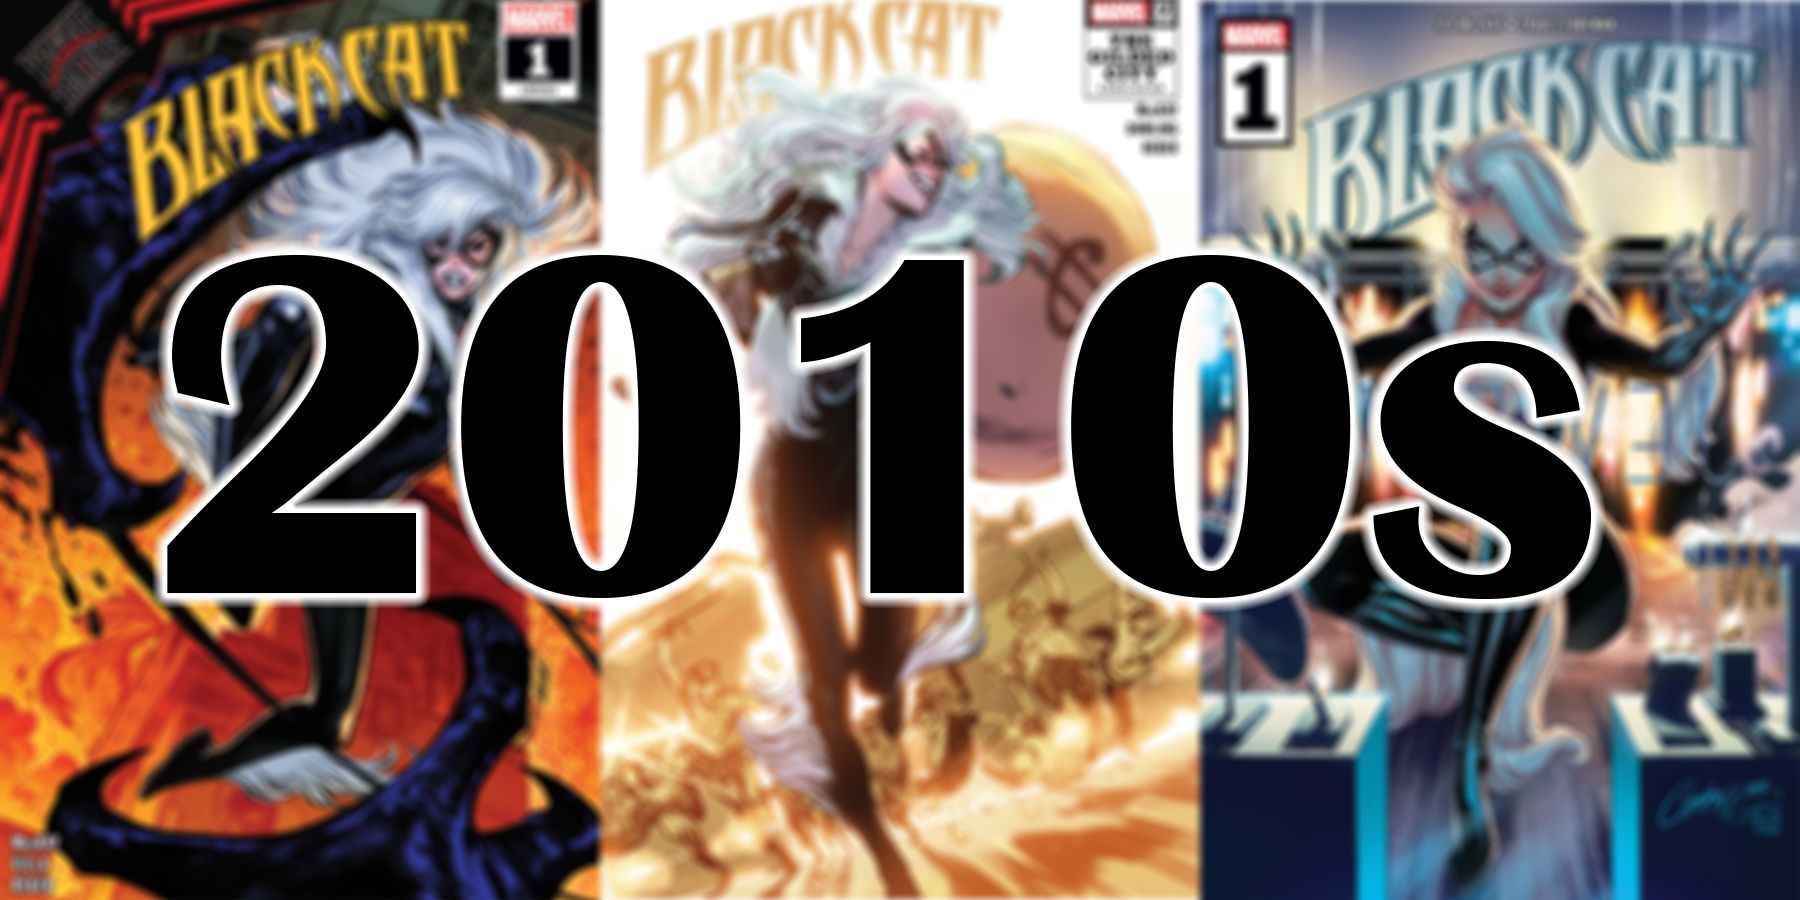 The 2010s years on top of a blurred background featuring 3 covers from Black Cat comic books by Marvel.